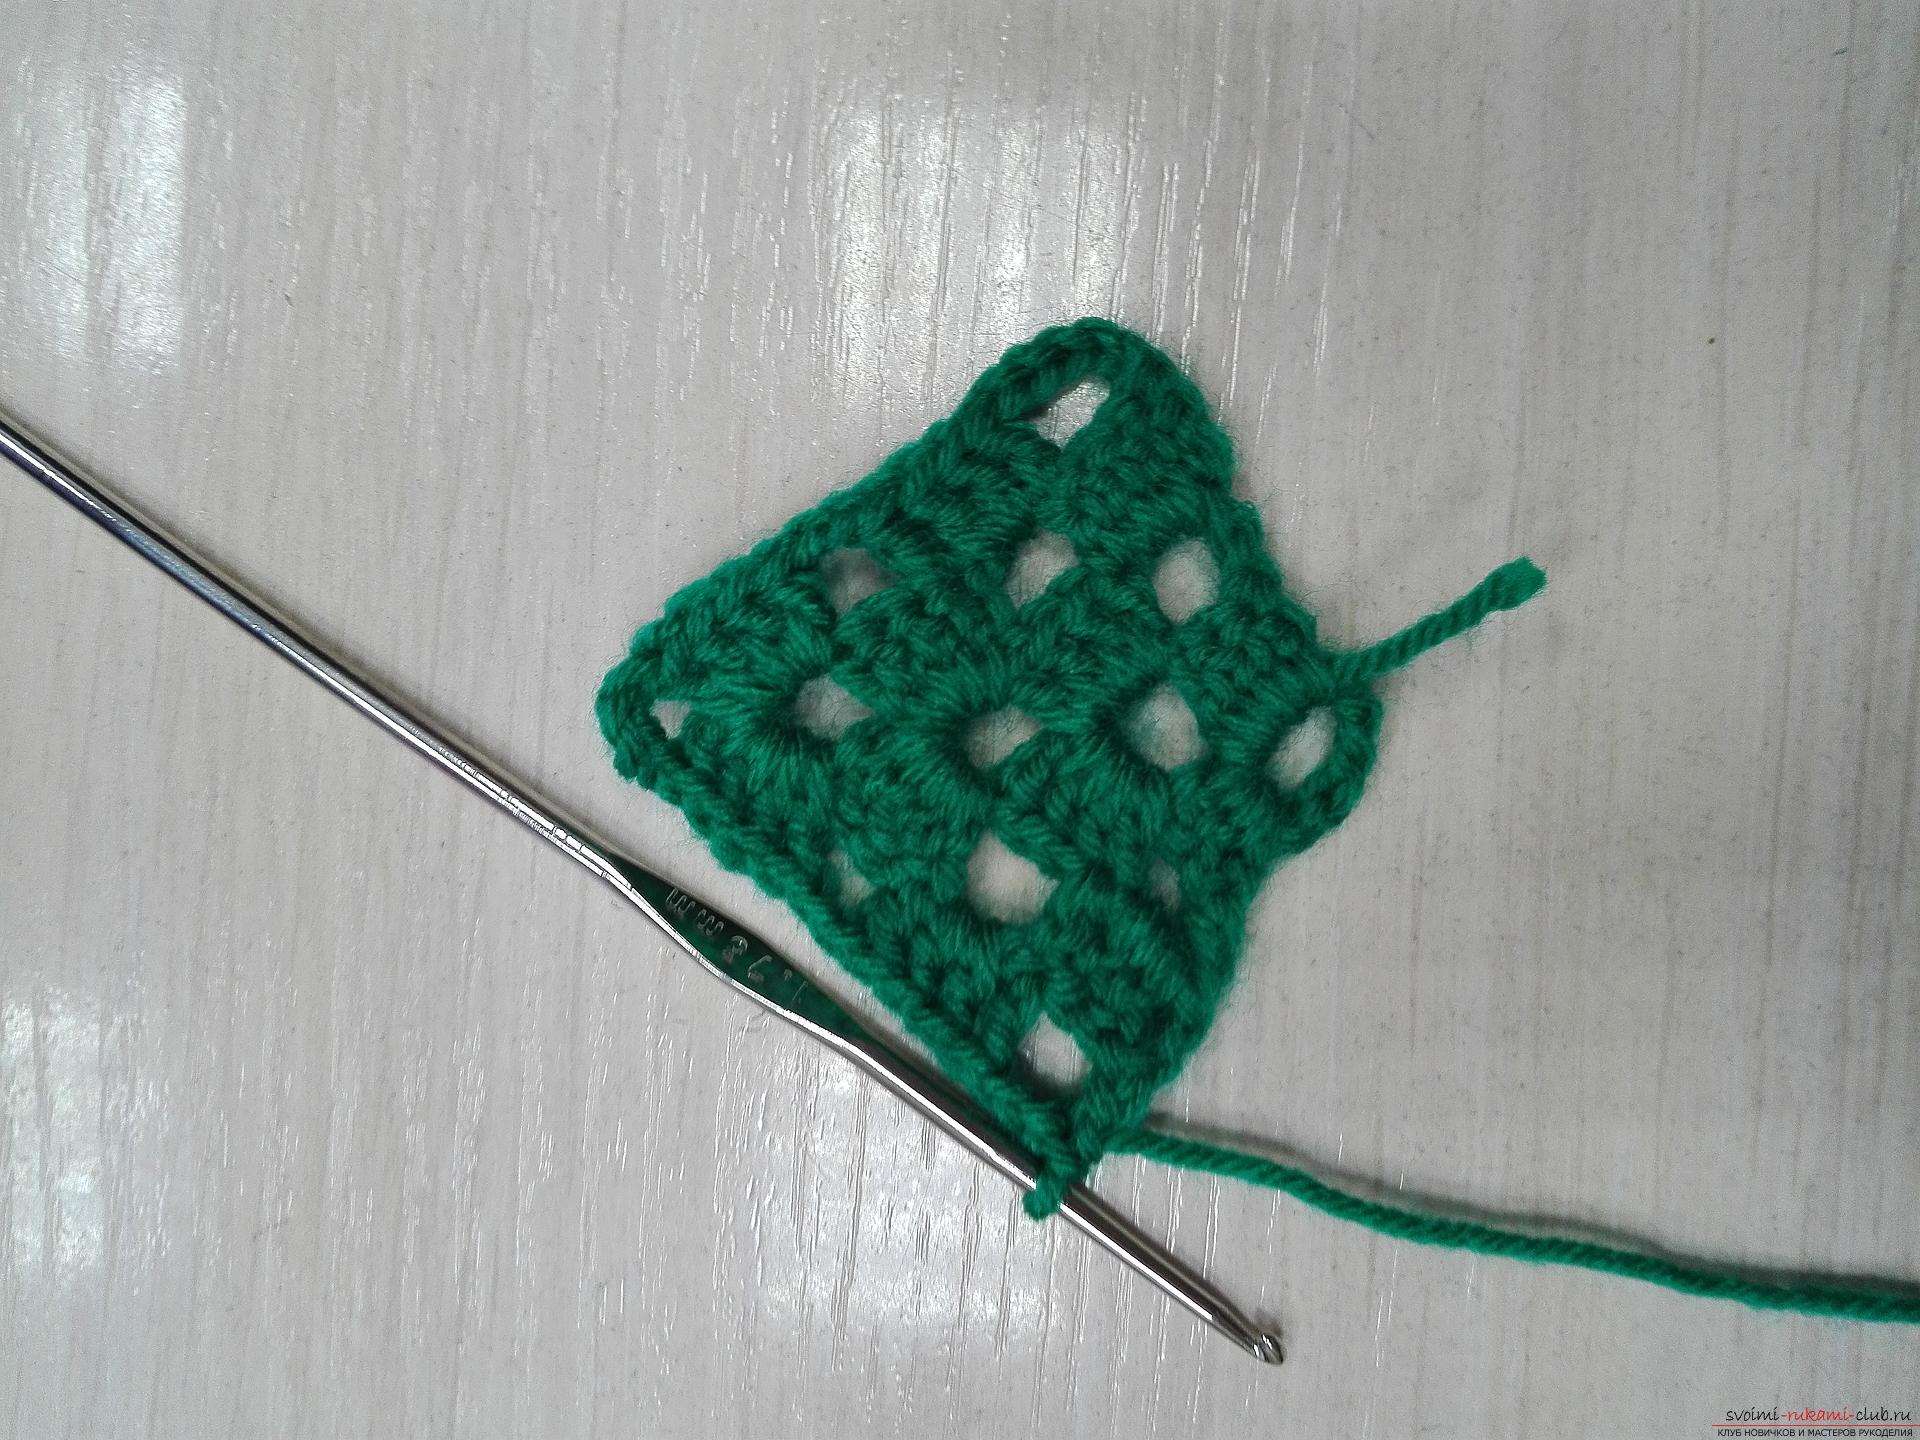 This master class on knitting is designed by the lover - he will teach how to tie the heart crochet. Photo №8